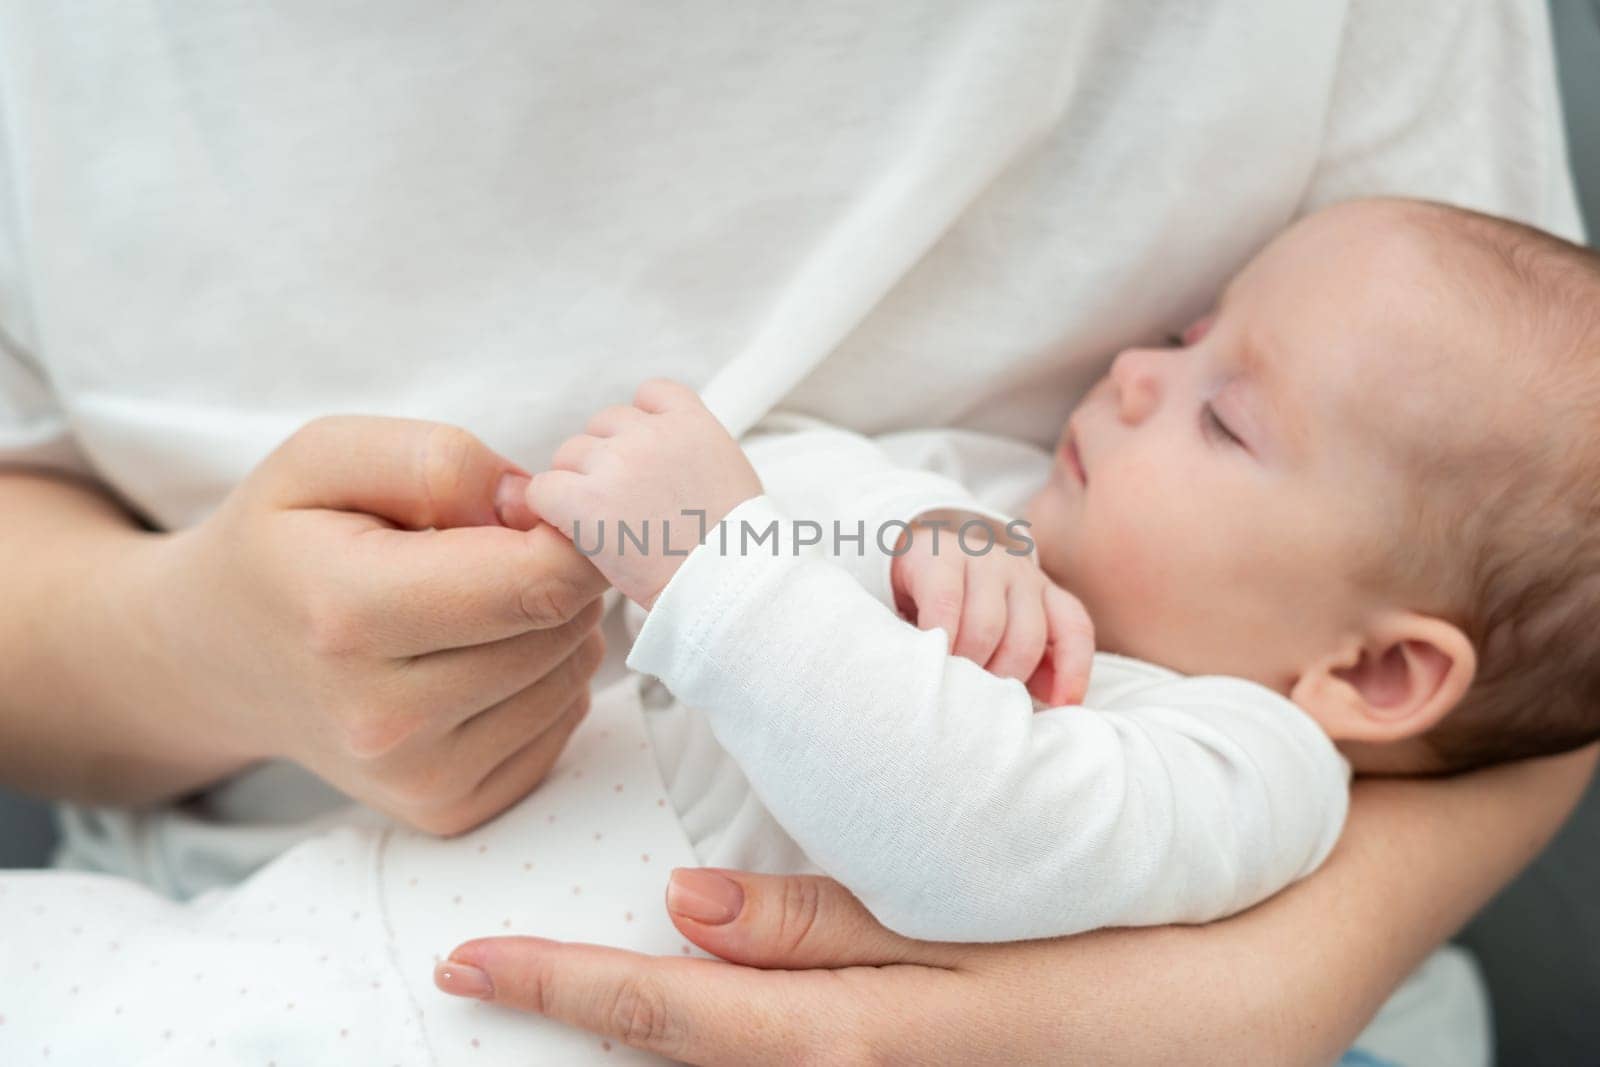 Infant's soft touch clasping mother's finger speaks volumes. Concept of pure mother-child connection by Mariakray